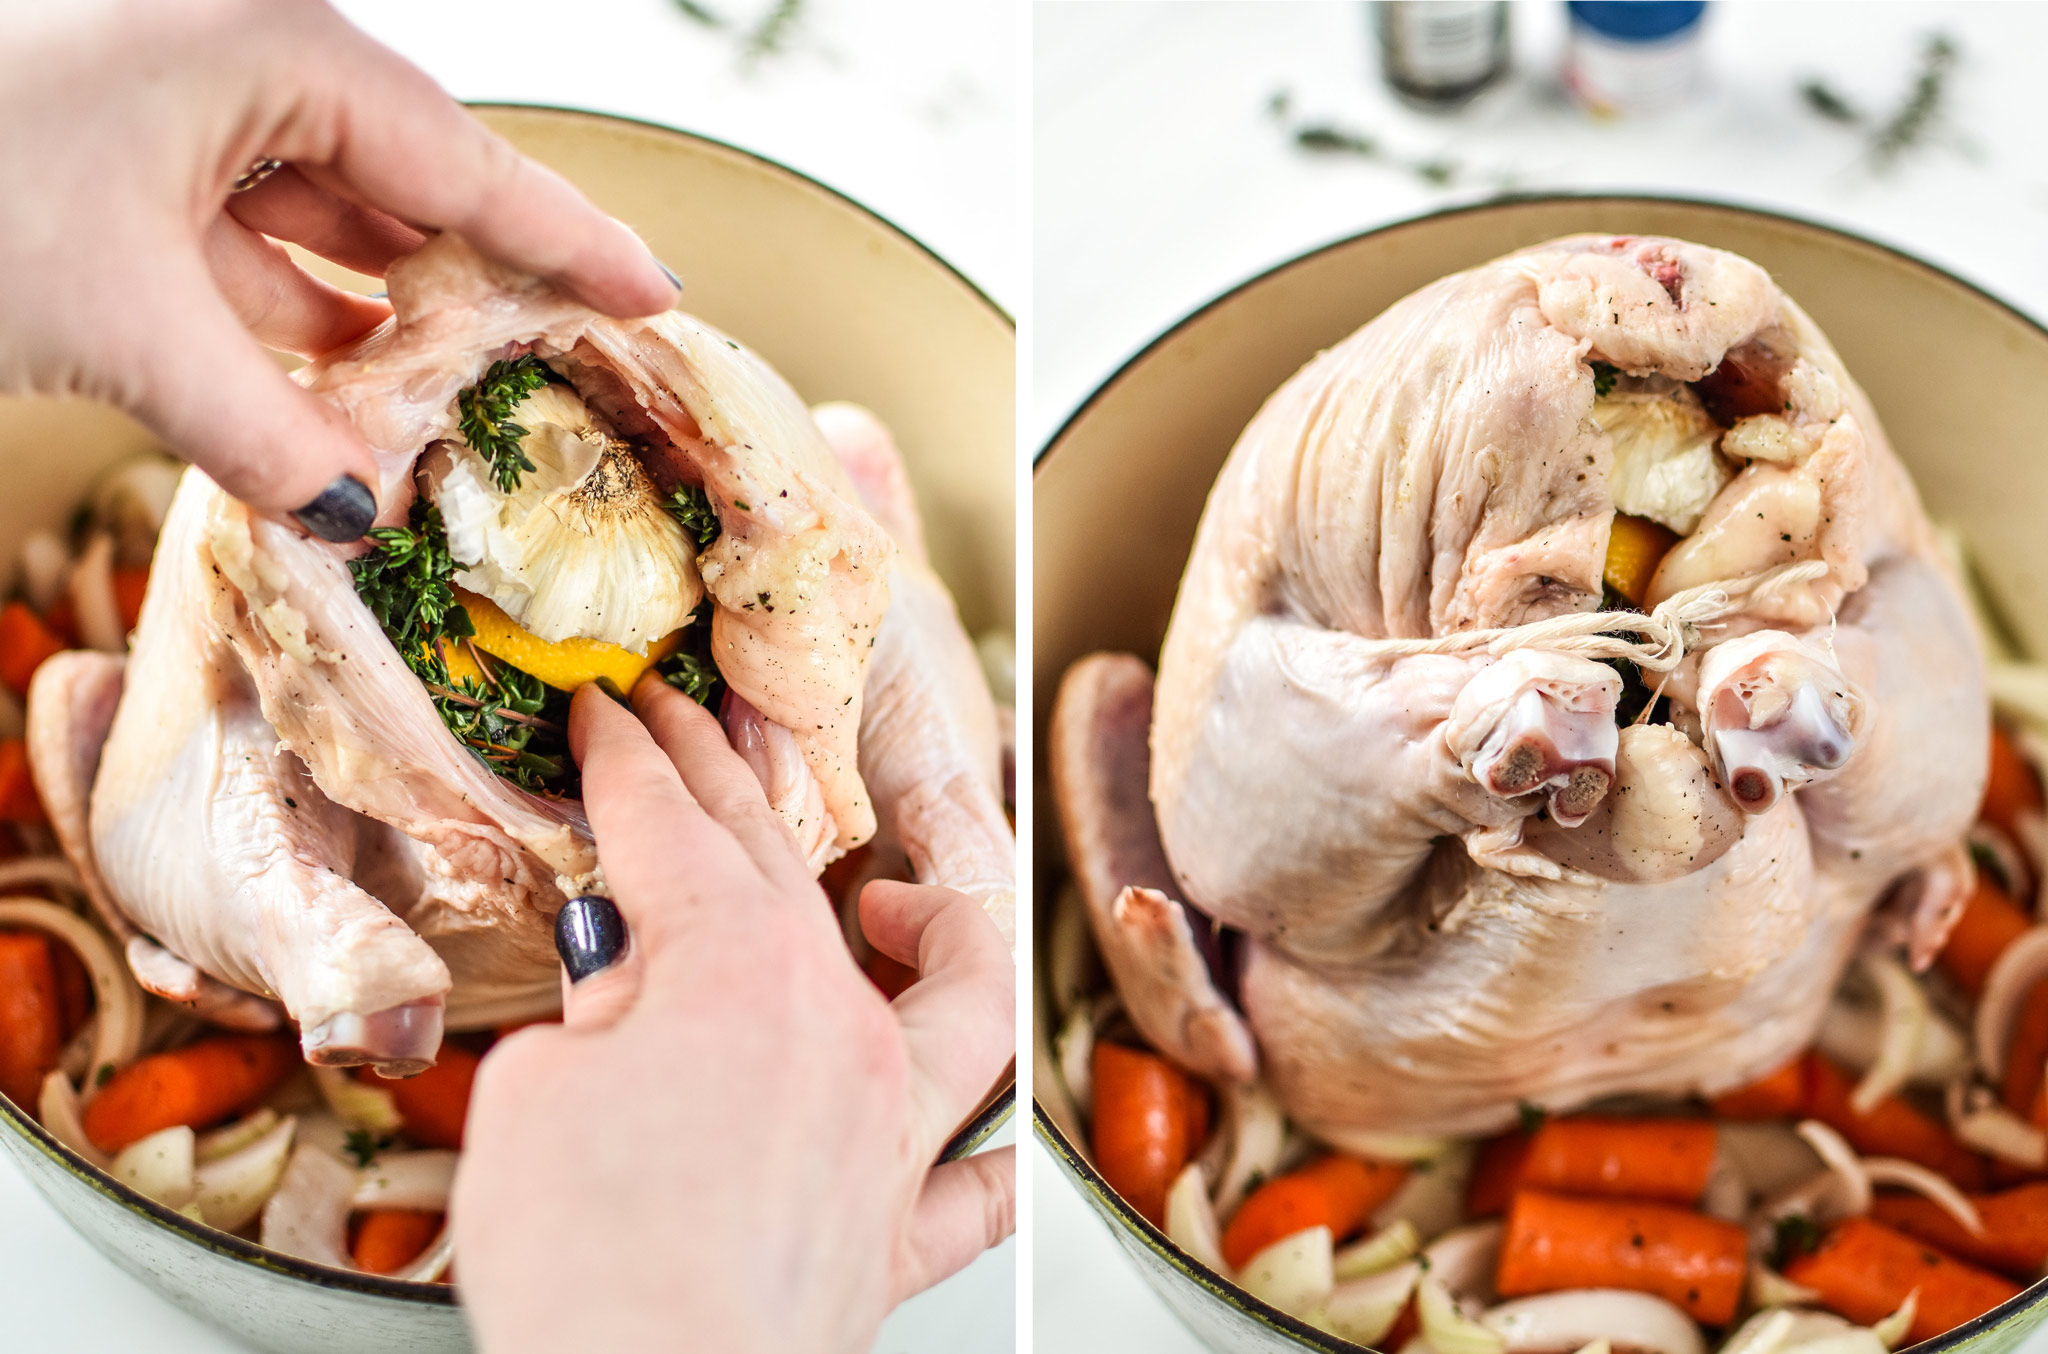 Stuffing the cavity of the chicken for the Simple Whole Roast Chicken recipe.